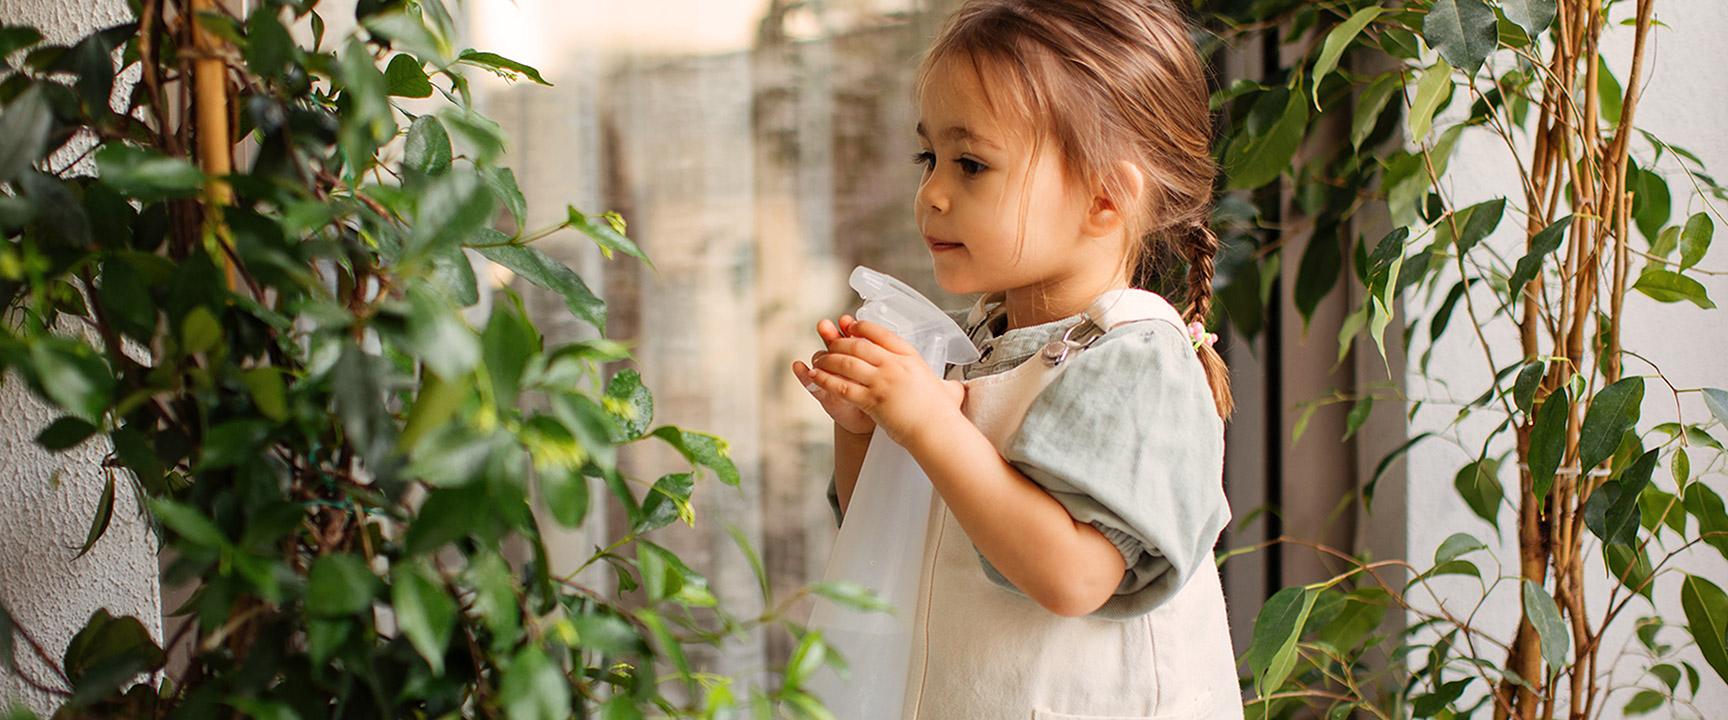 young child misting house plants